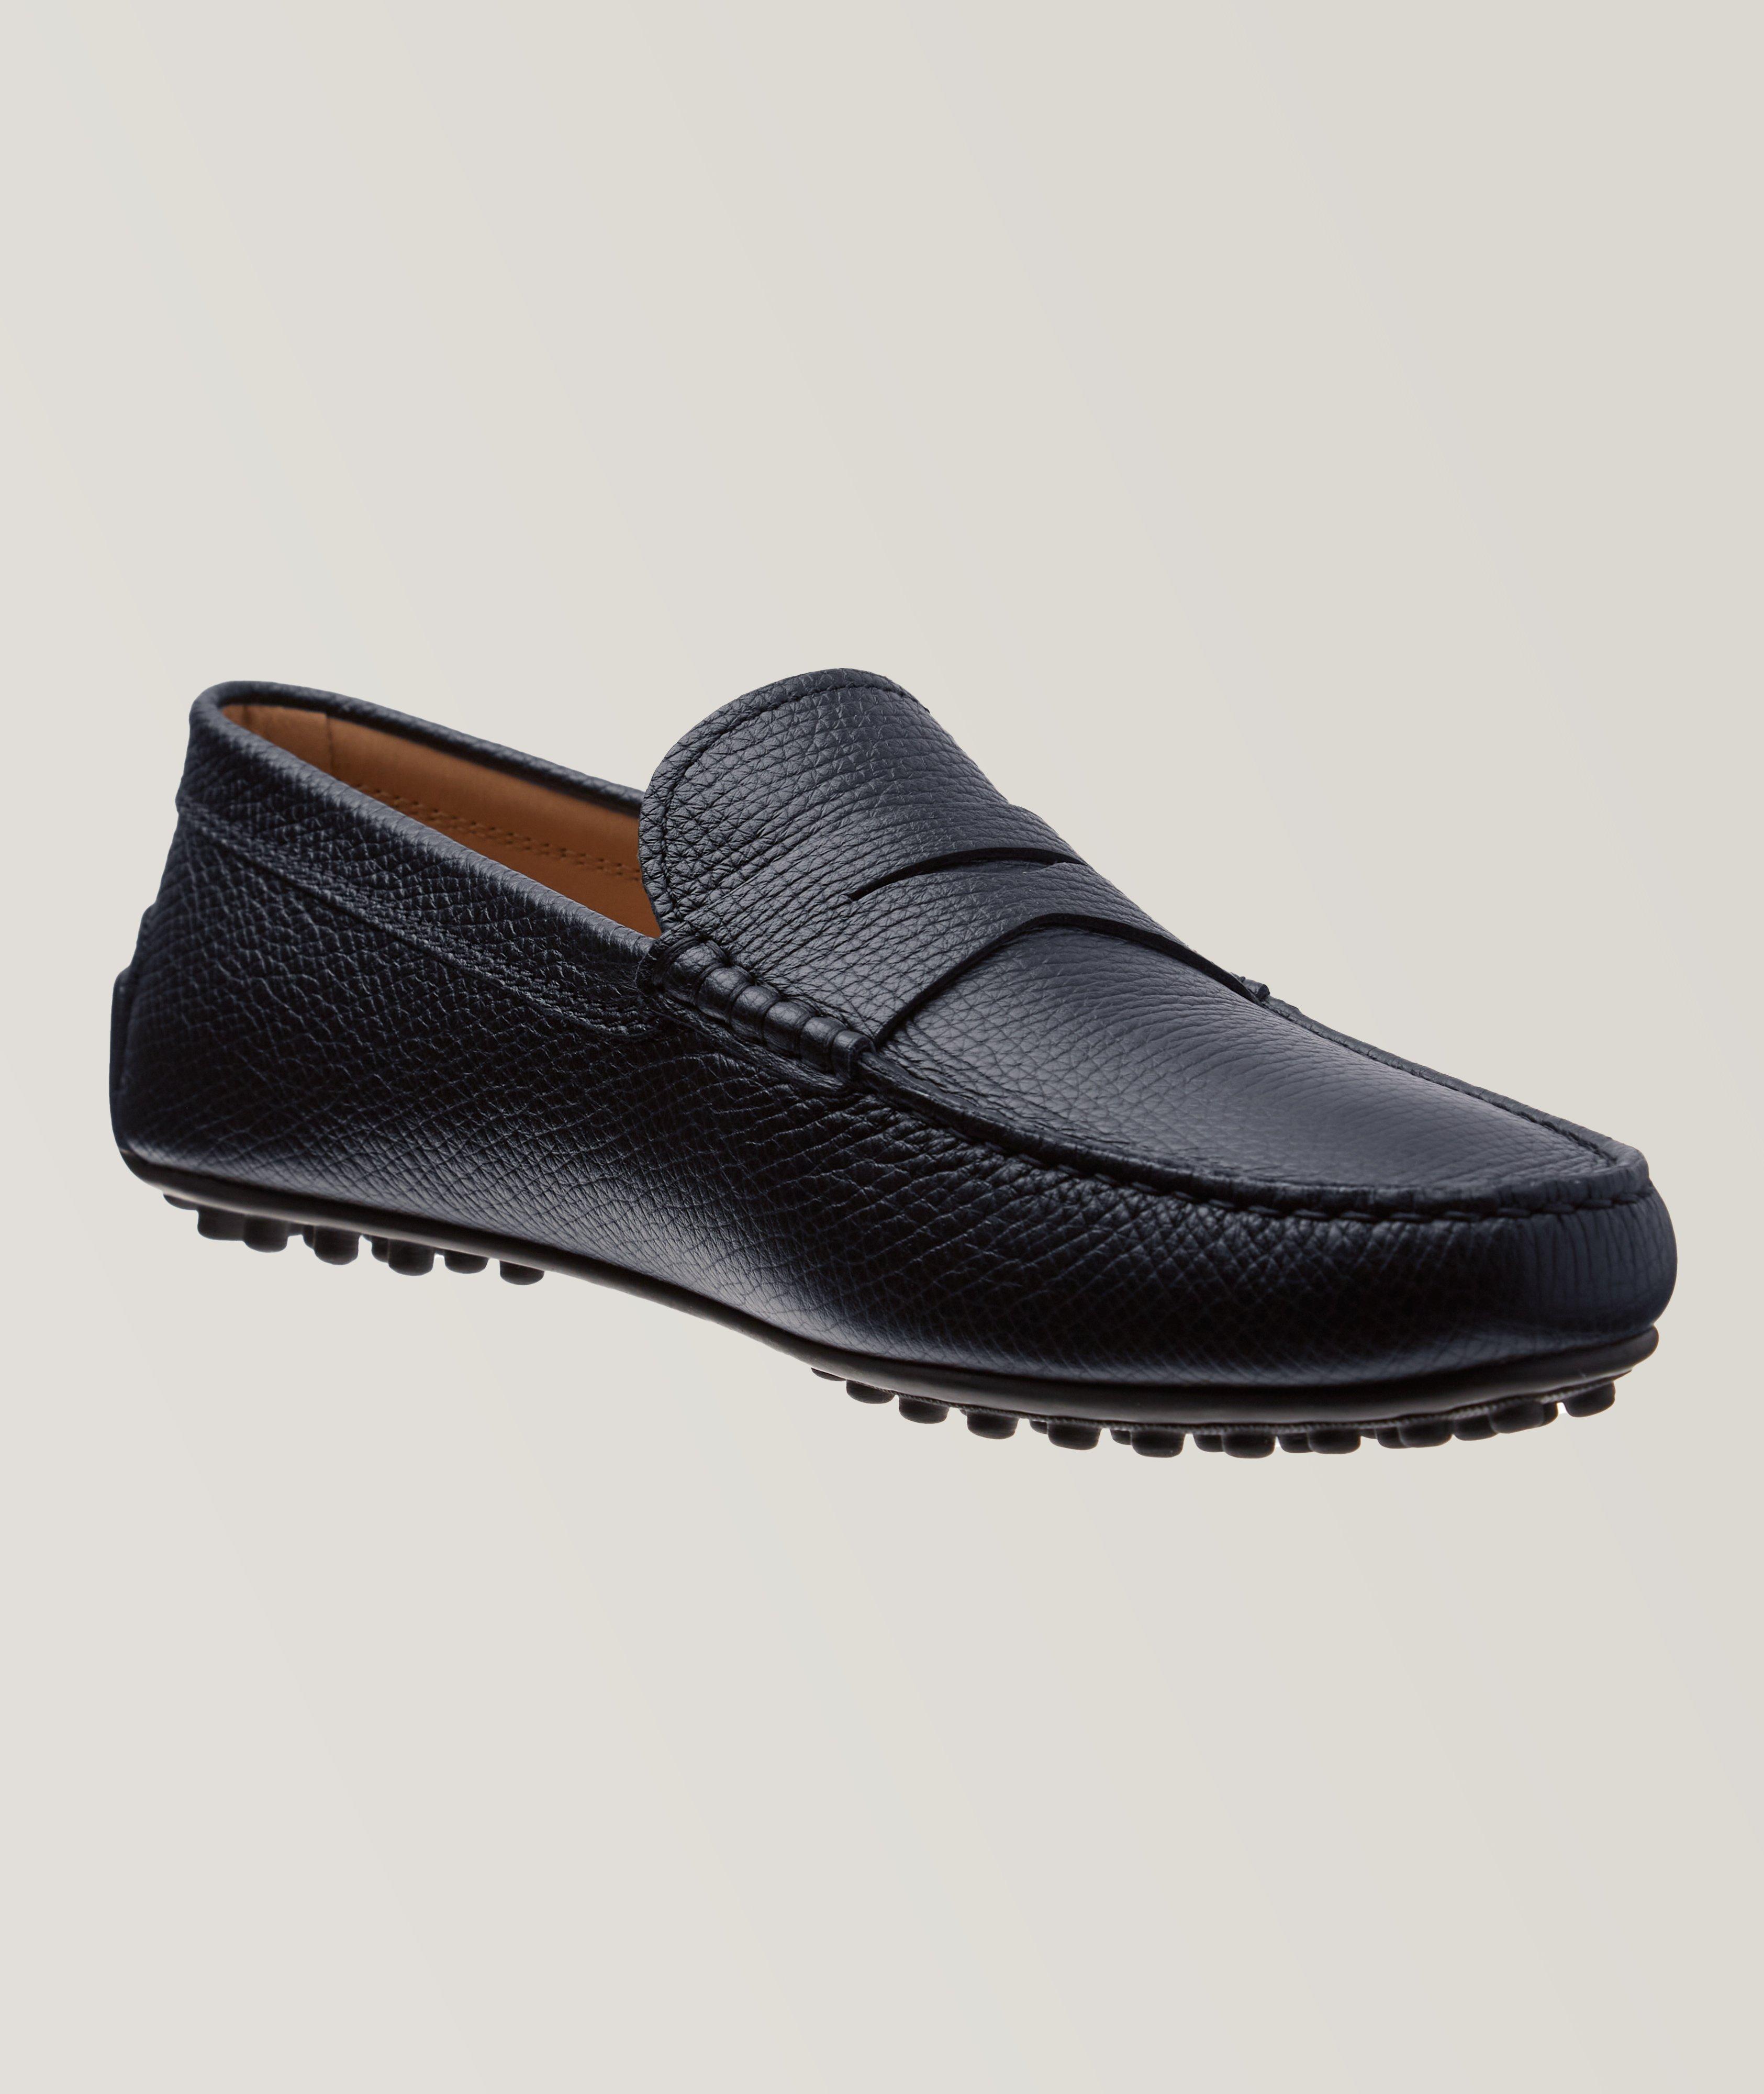 City Gommino Leather Loafers image 0